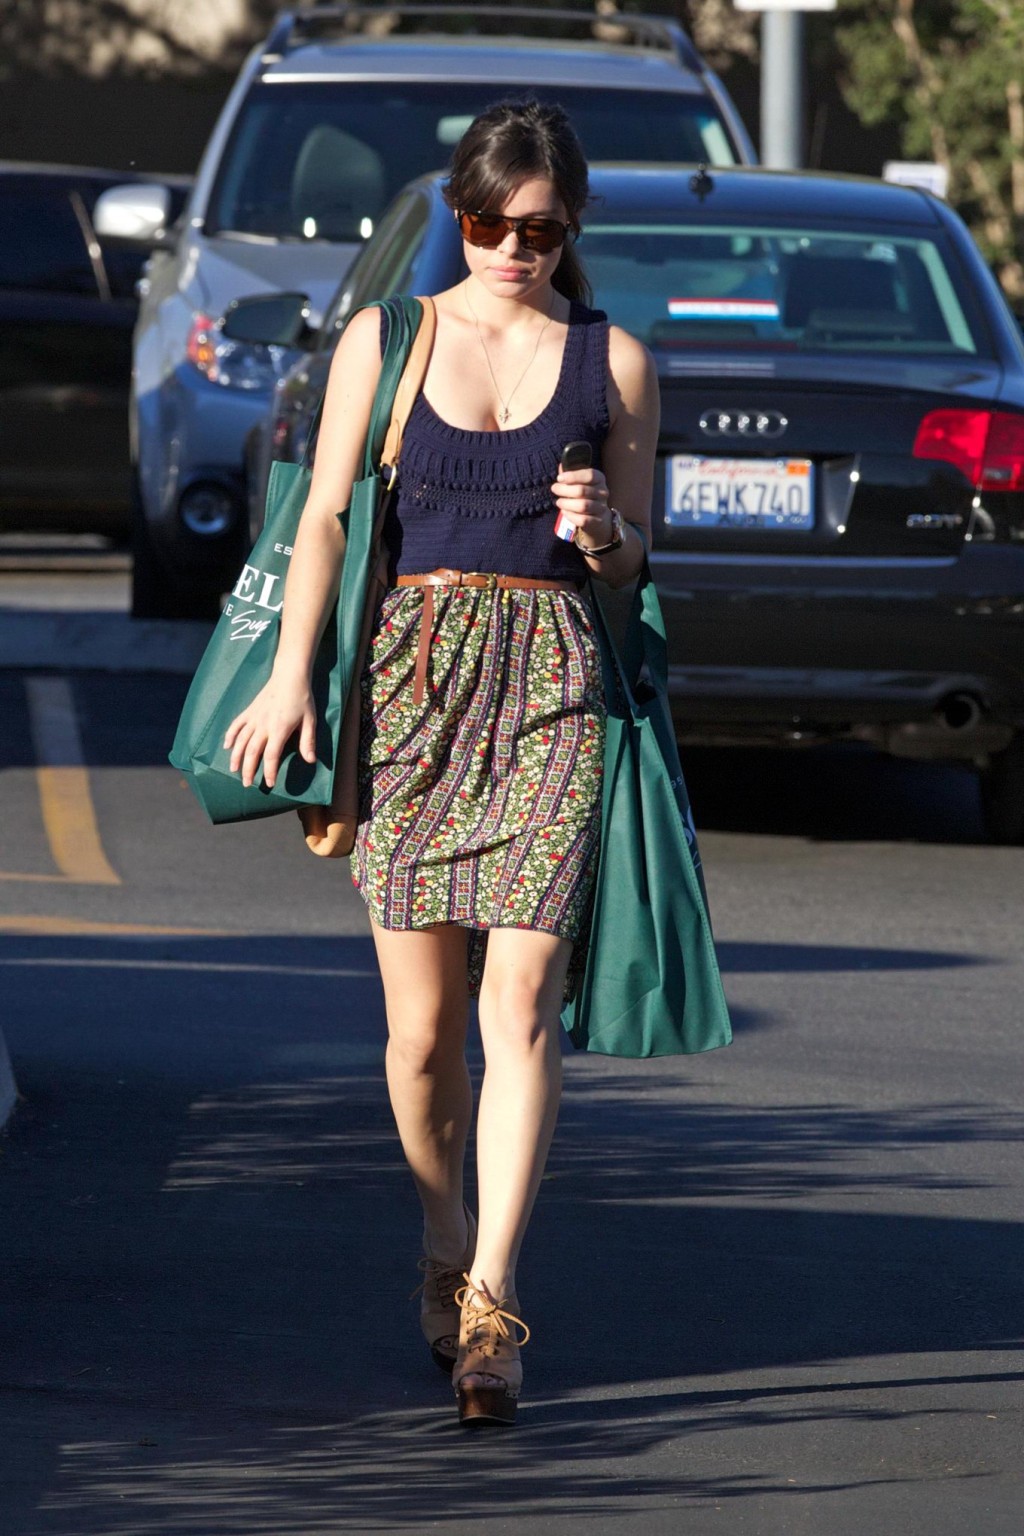 Alex Frnka looks sexy wearing a woven top  a skirt whie shopping groceries in LA #75249347